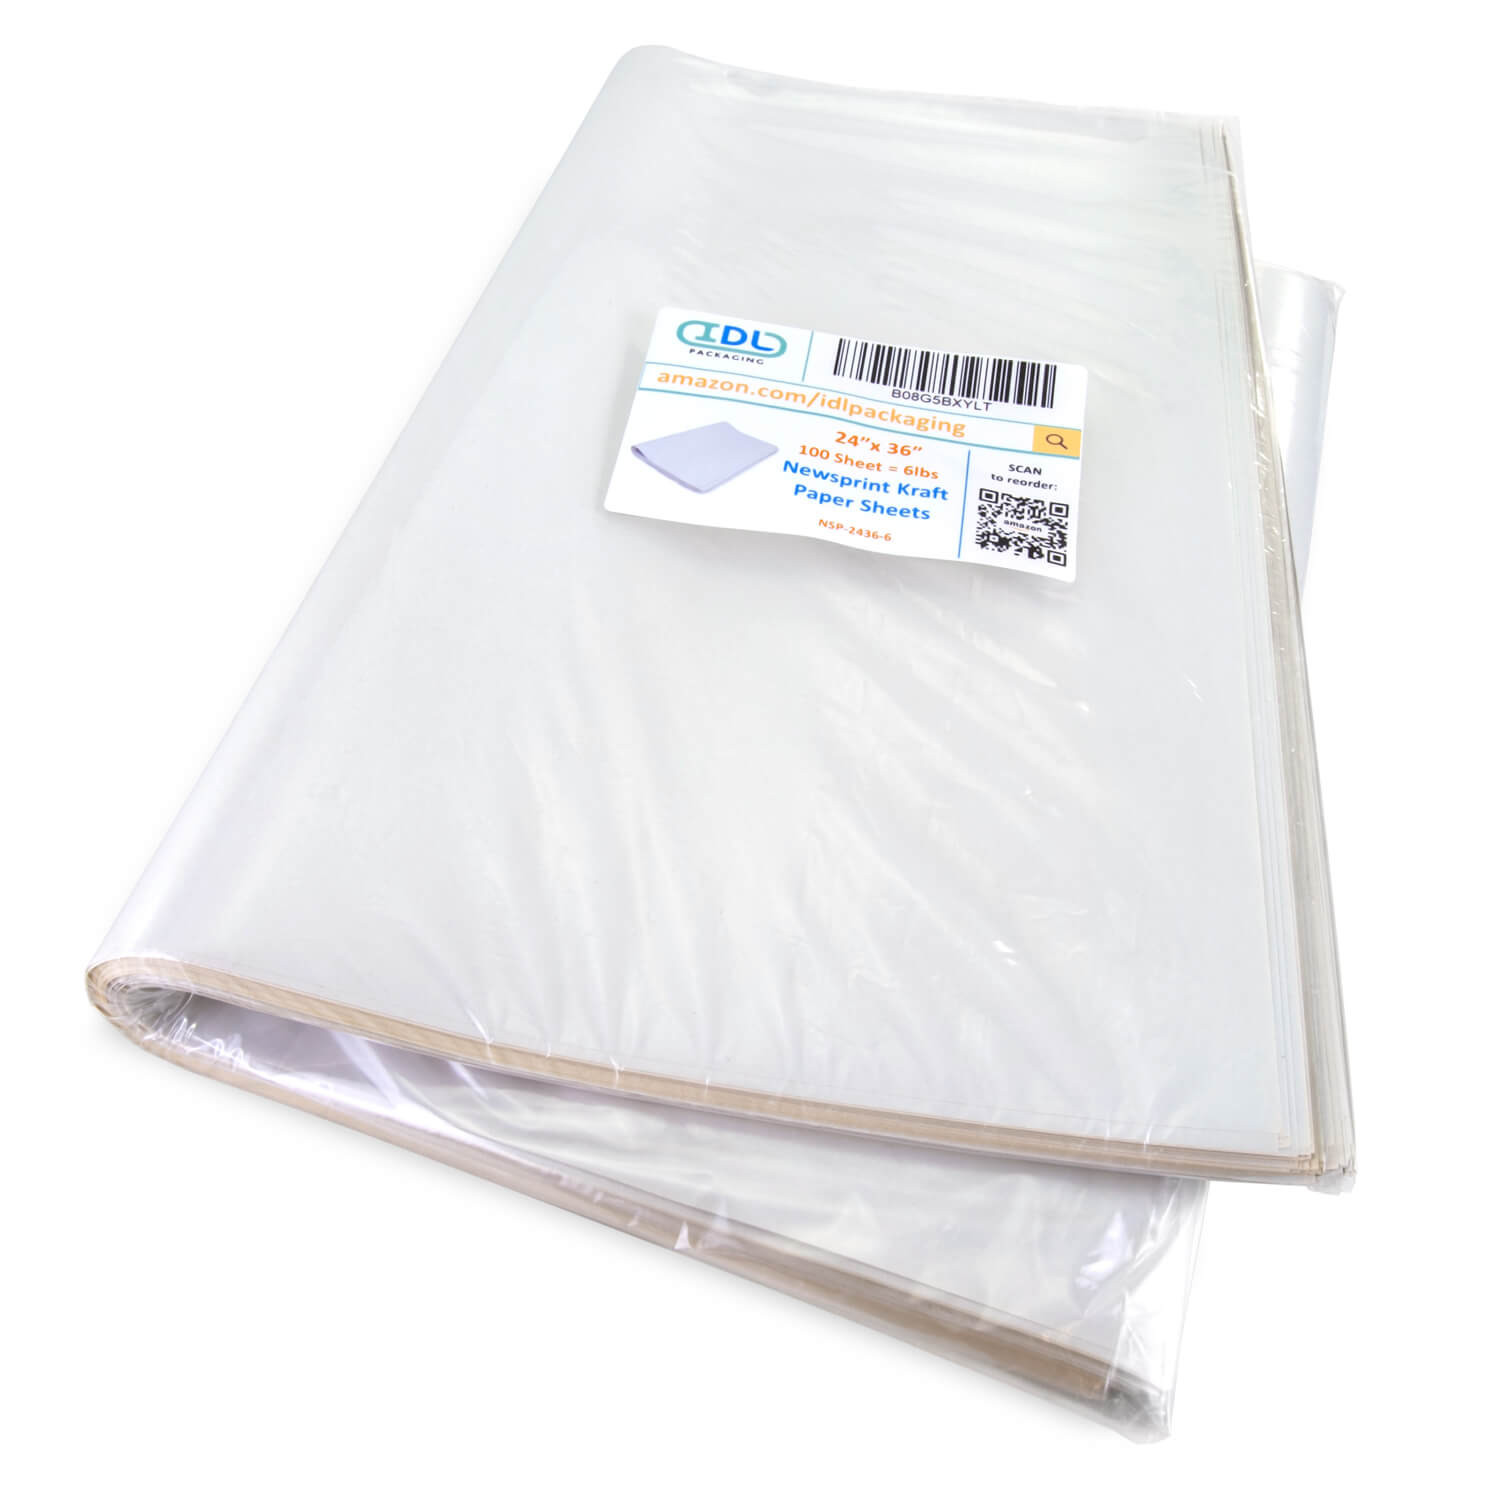 Honeycomb Packing Paper Set, 15 x 1400', White buy in stock in U.S. in IDL  Packaging